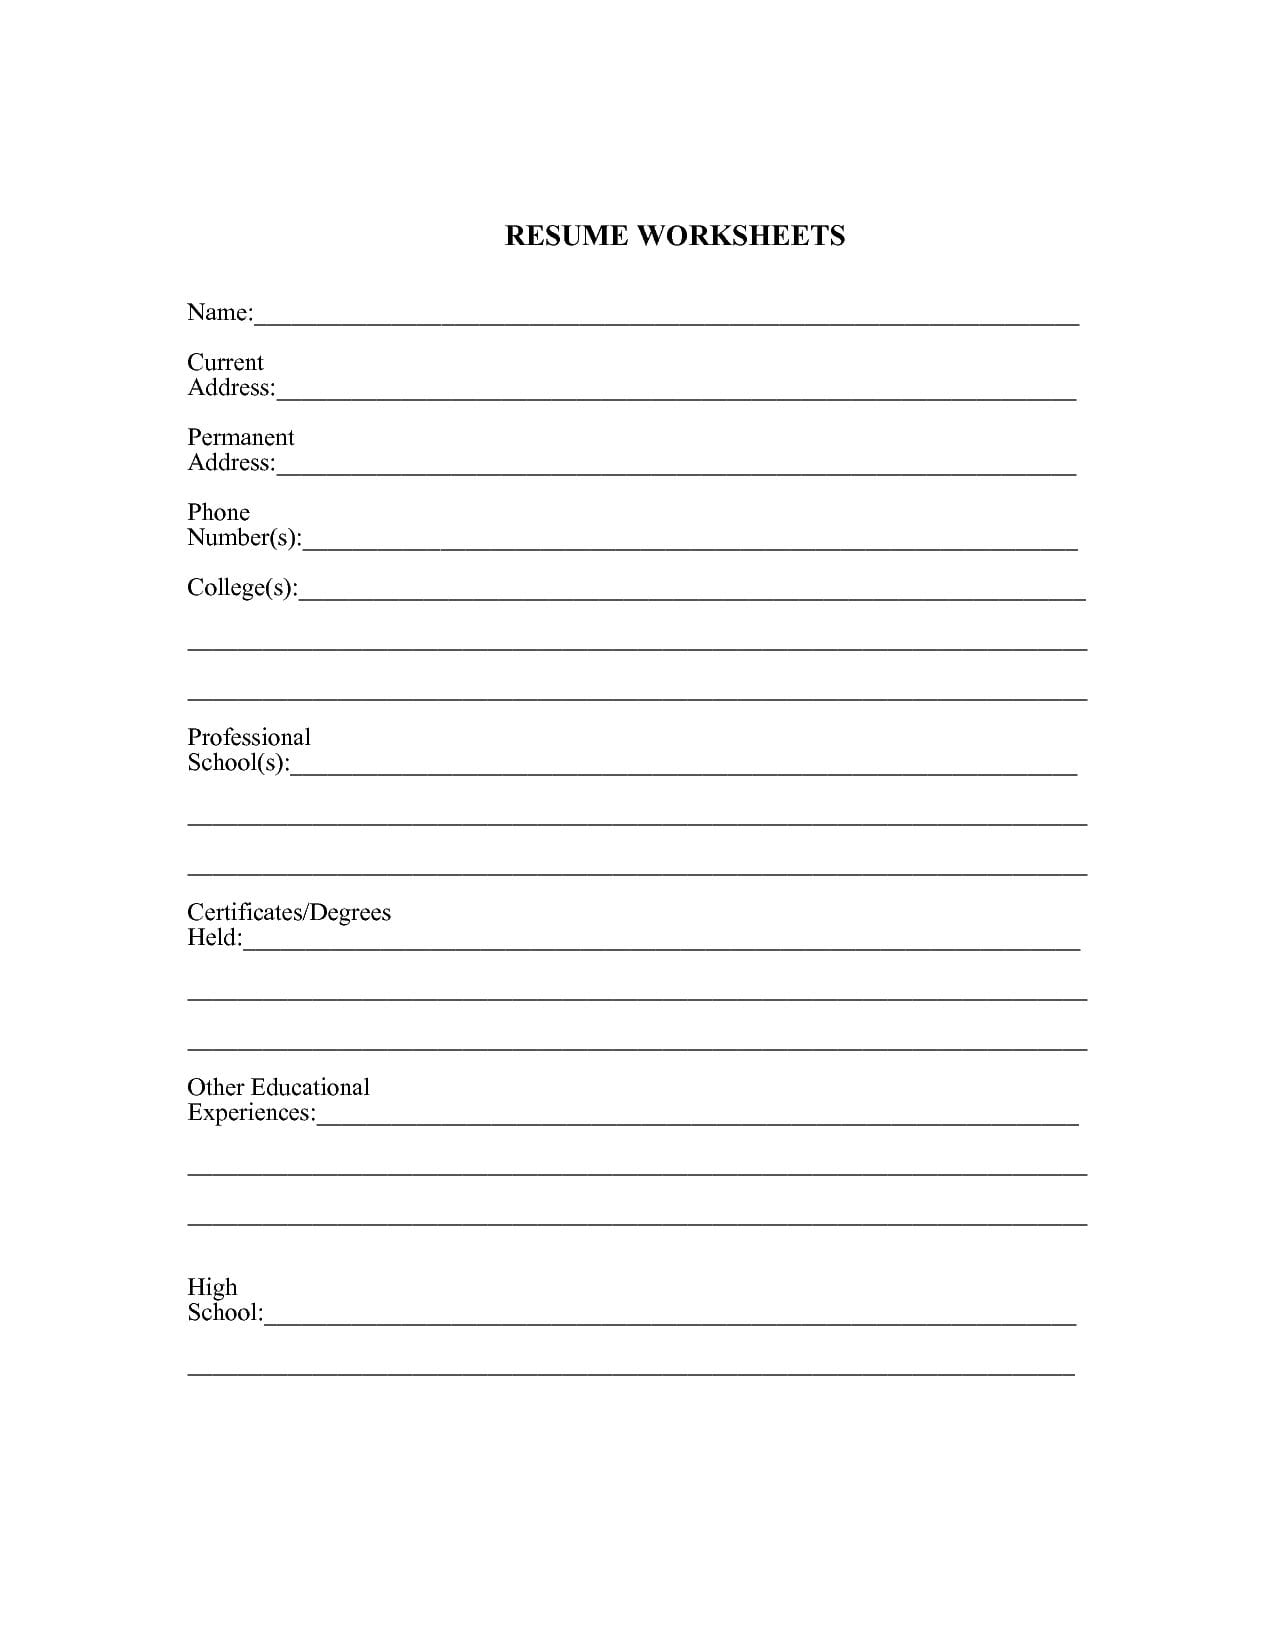 Resume Worksheet For High School Students  Jwritings Regarding Resume Worksheet For Middle School Students